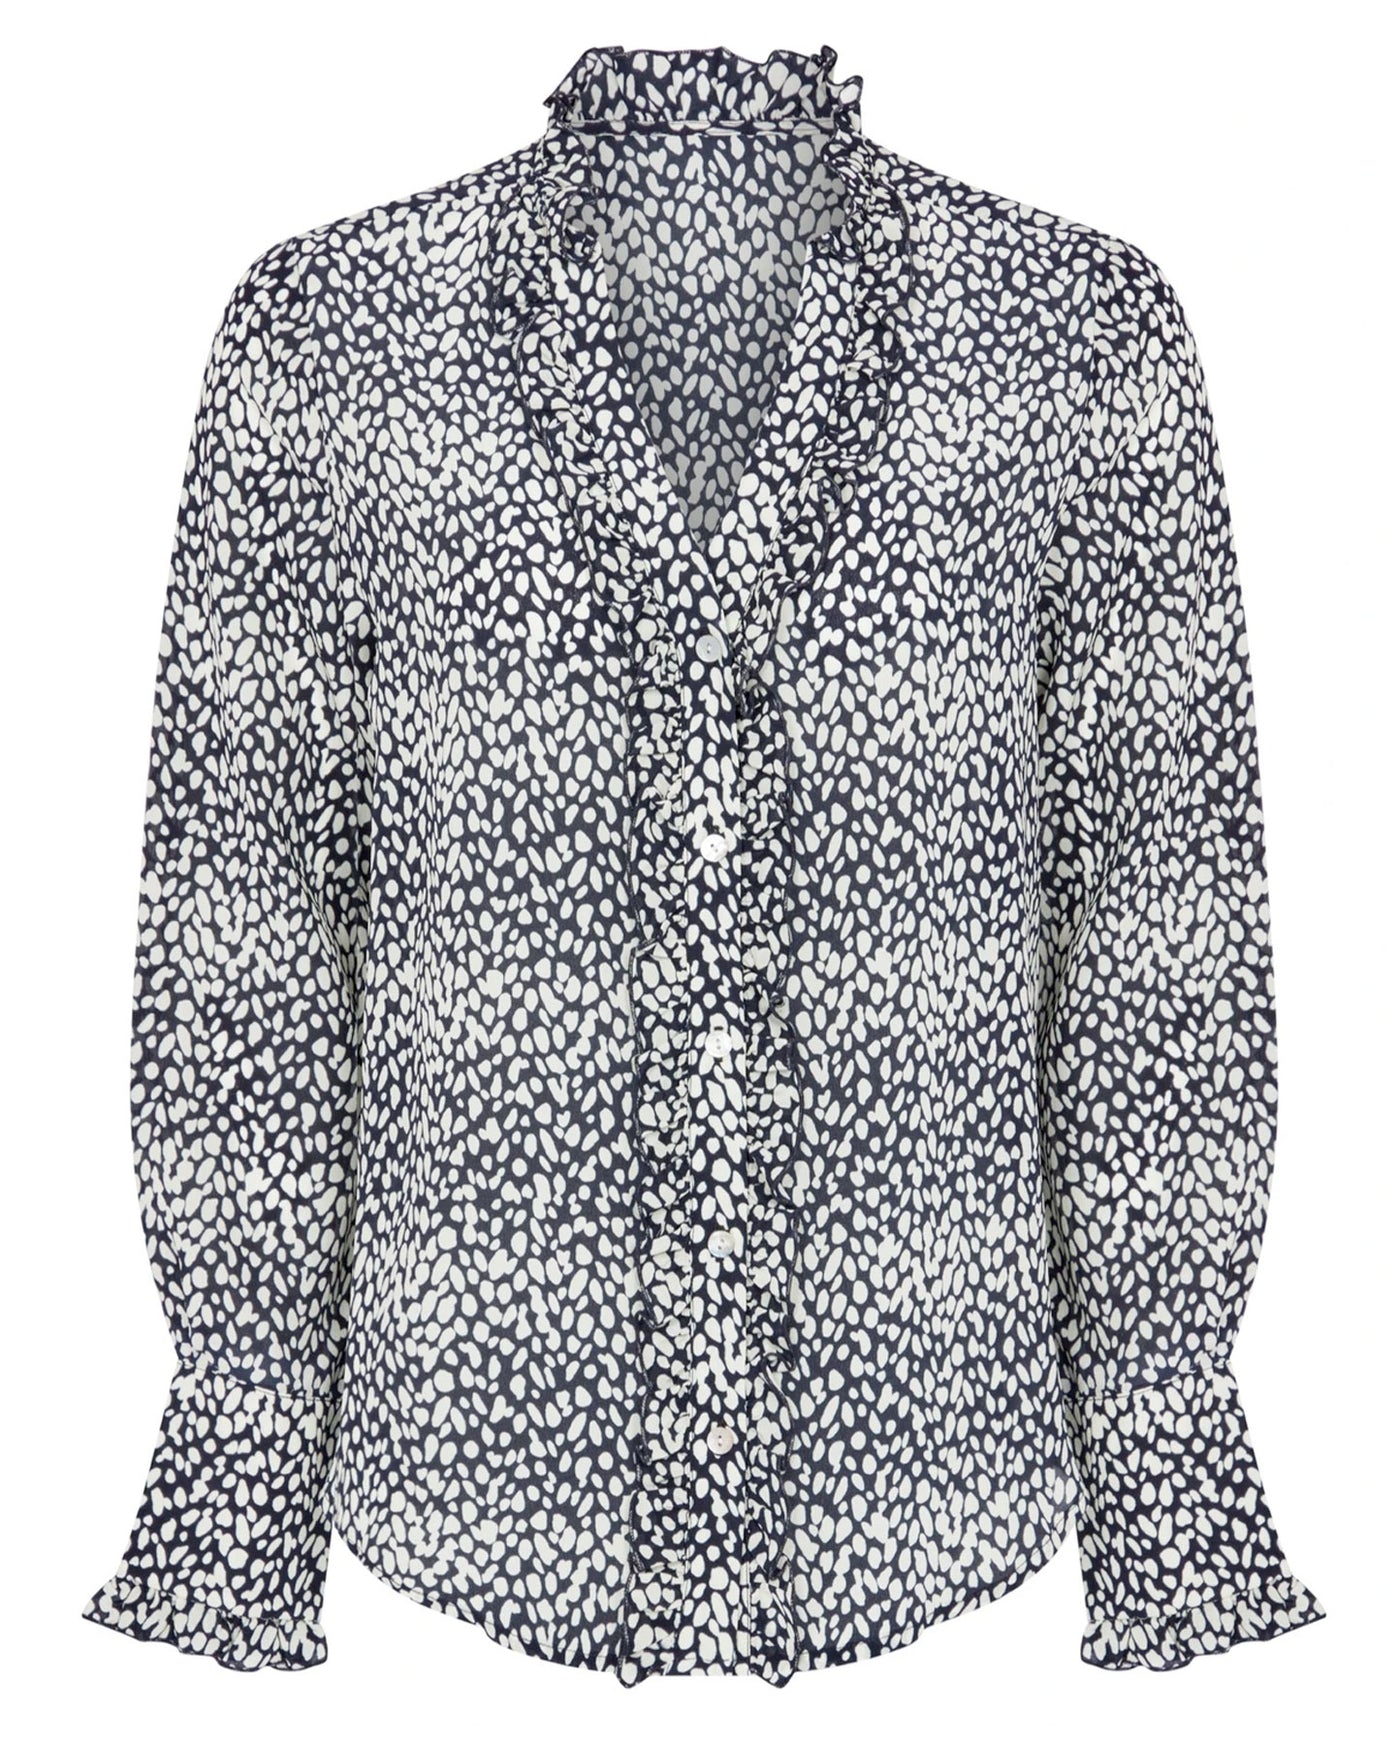 Women's navy print shirt with white abstract pattern in pure silk